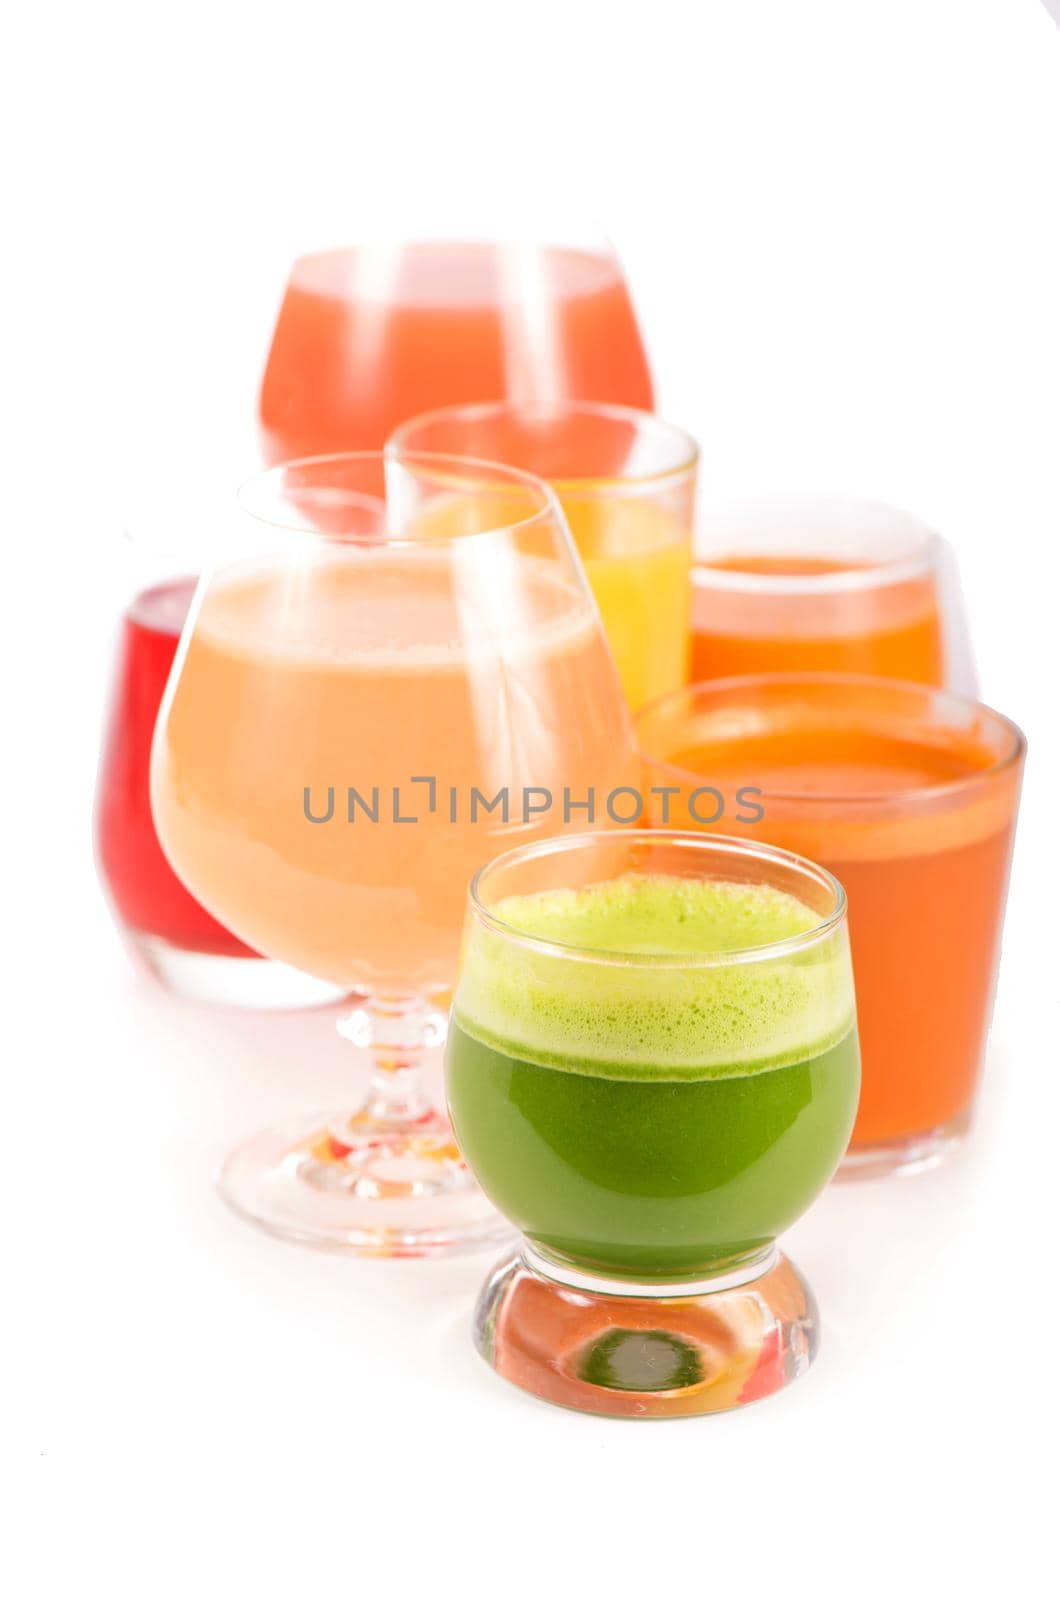 Glasses with fresh organic vegetable and fruit juices isolated on white. by aprilphoto